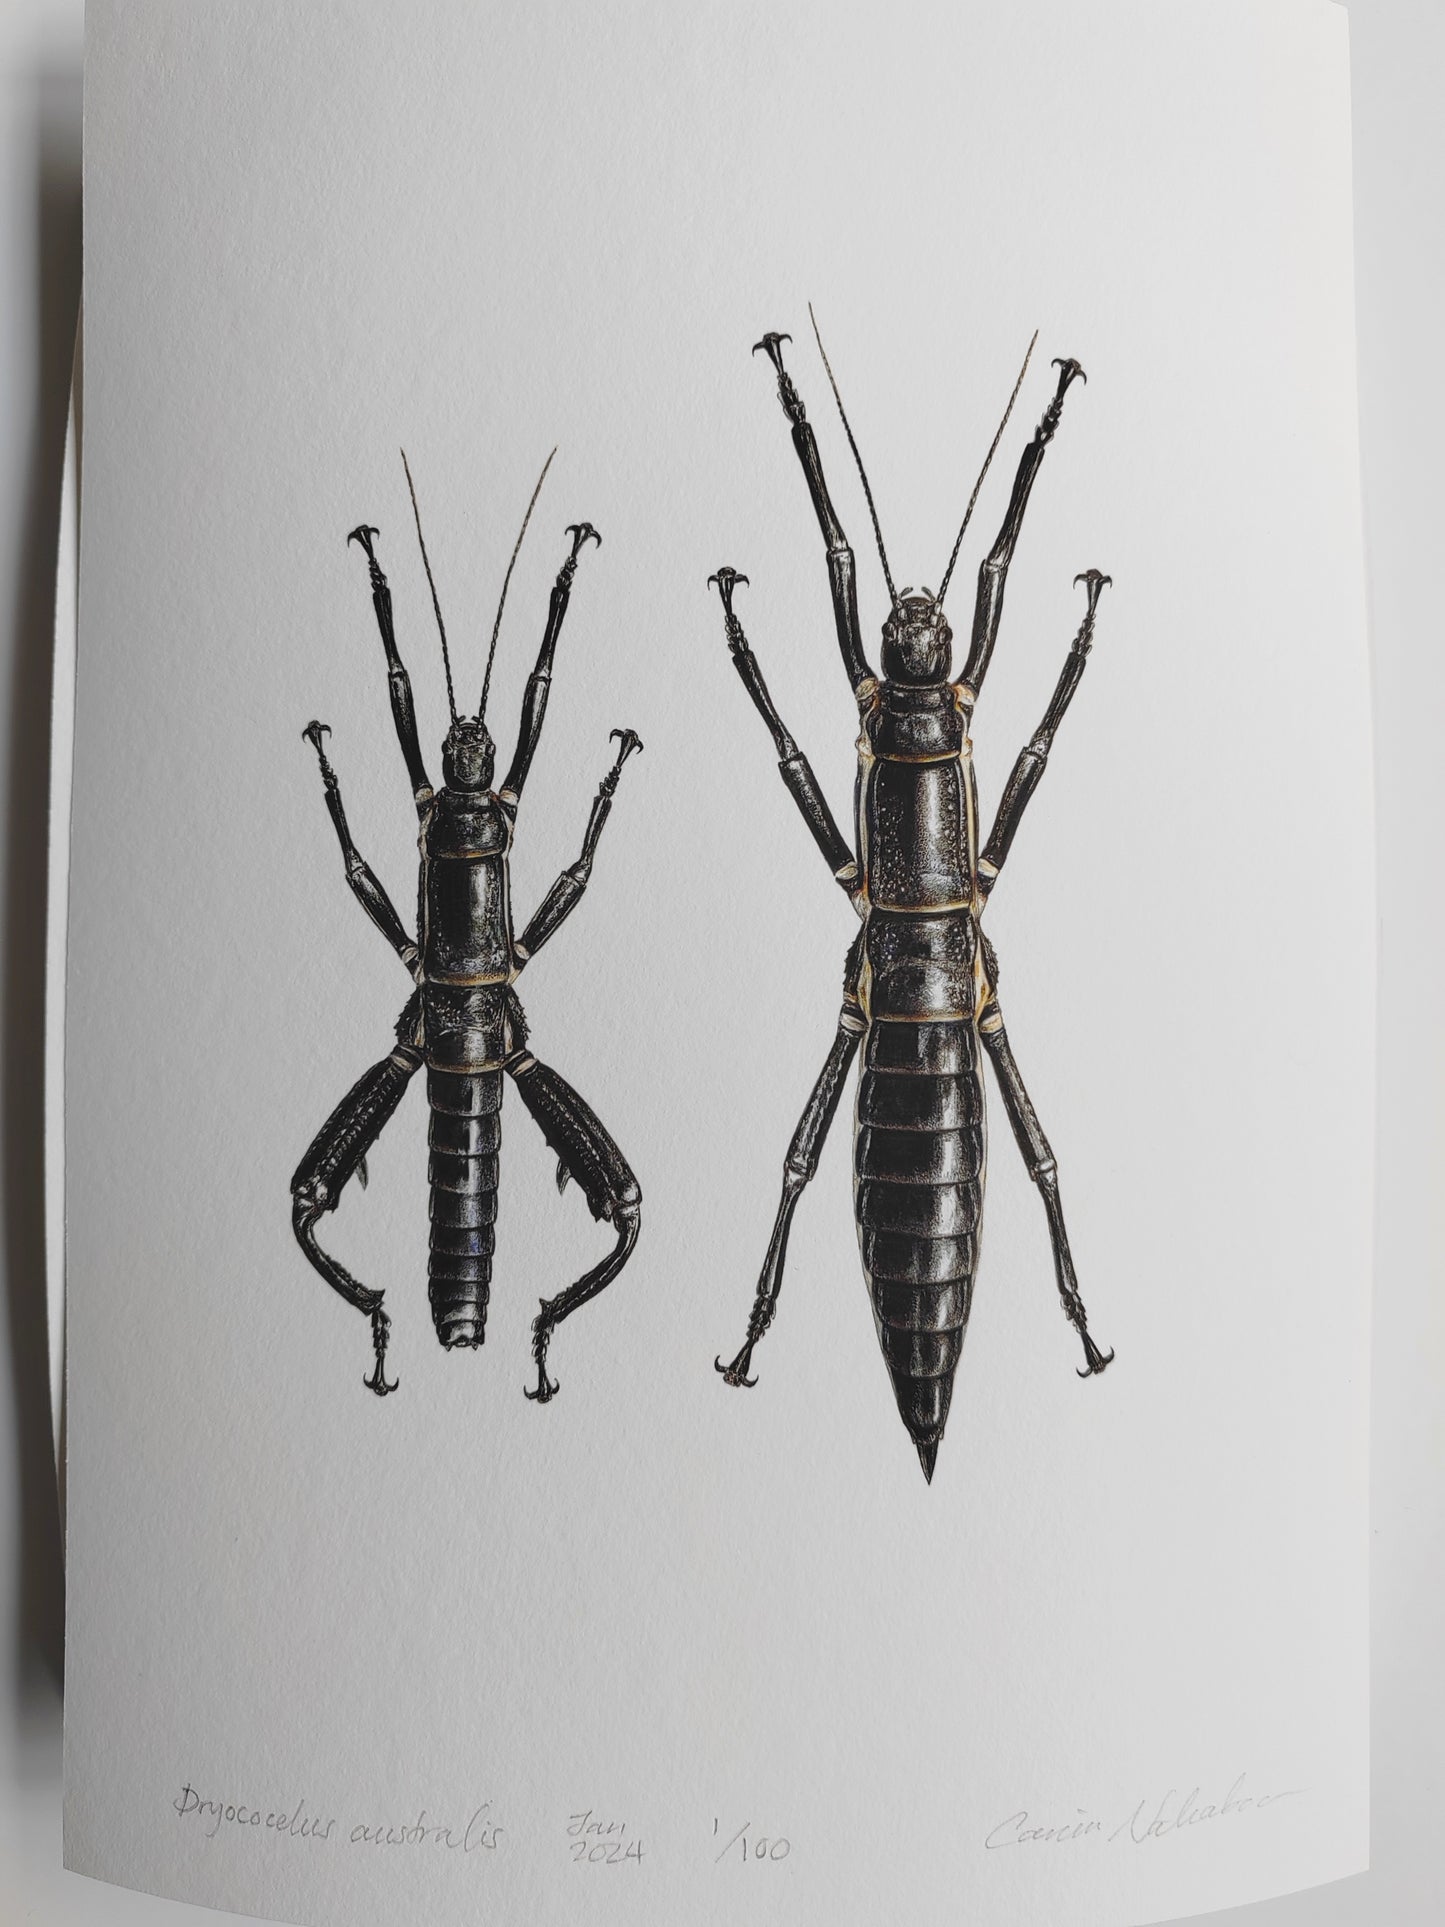 A4 size limited edition art print Dryococelus australis, the Lord Howe Island Phasmid, Stick insect, male & female